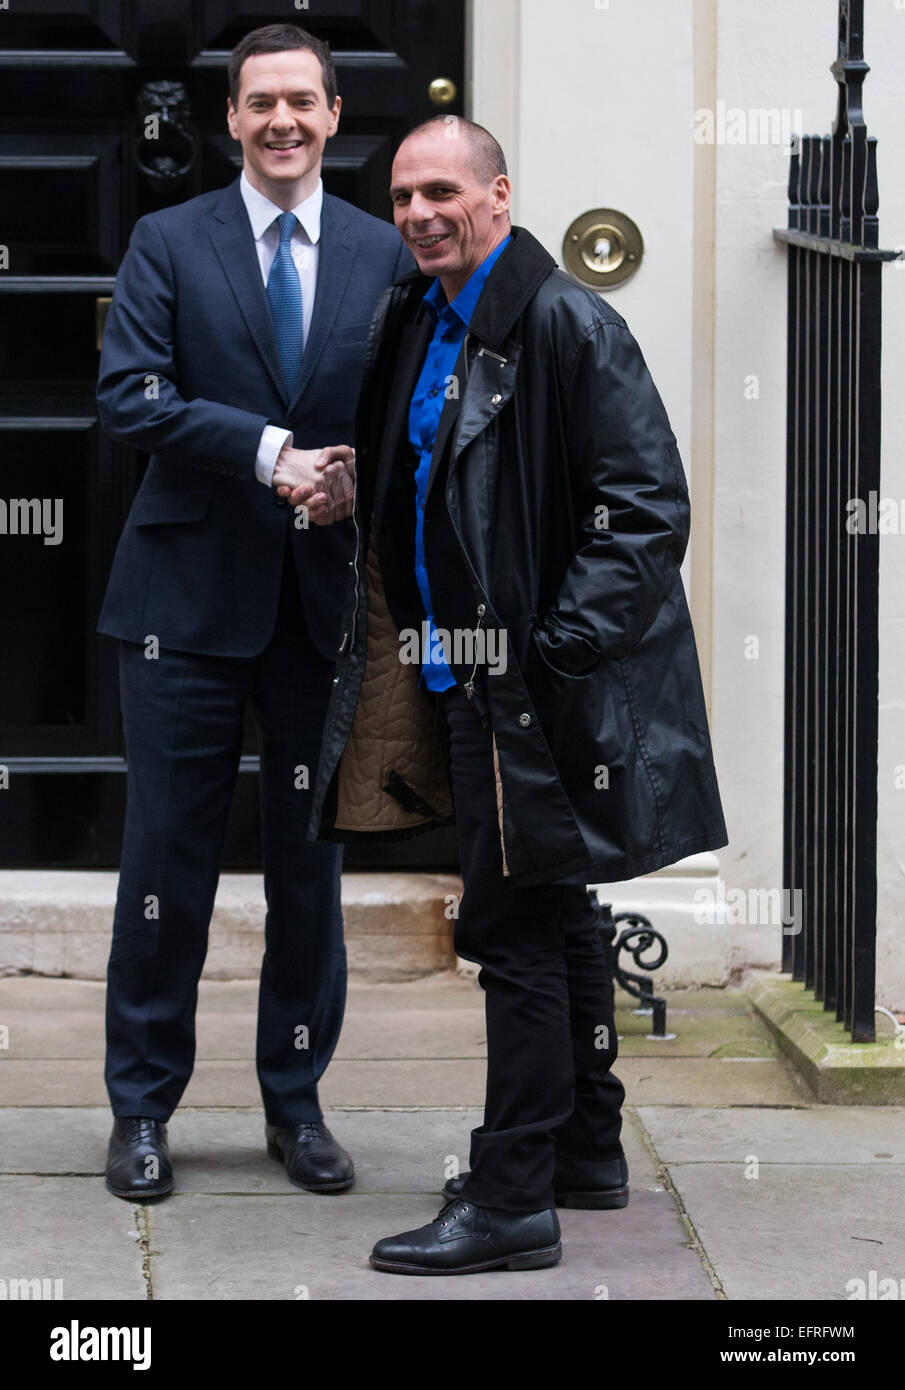 Monday, February 2, 2015  George Osborne meets Greek finance minister Yanis Varoufakis at 11 Downing Street in central London. Stock Photo